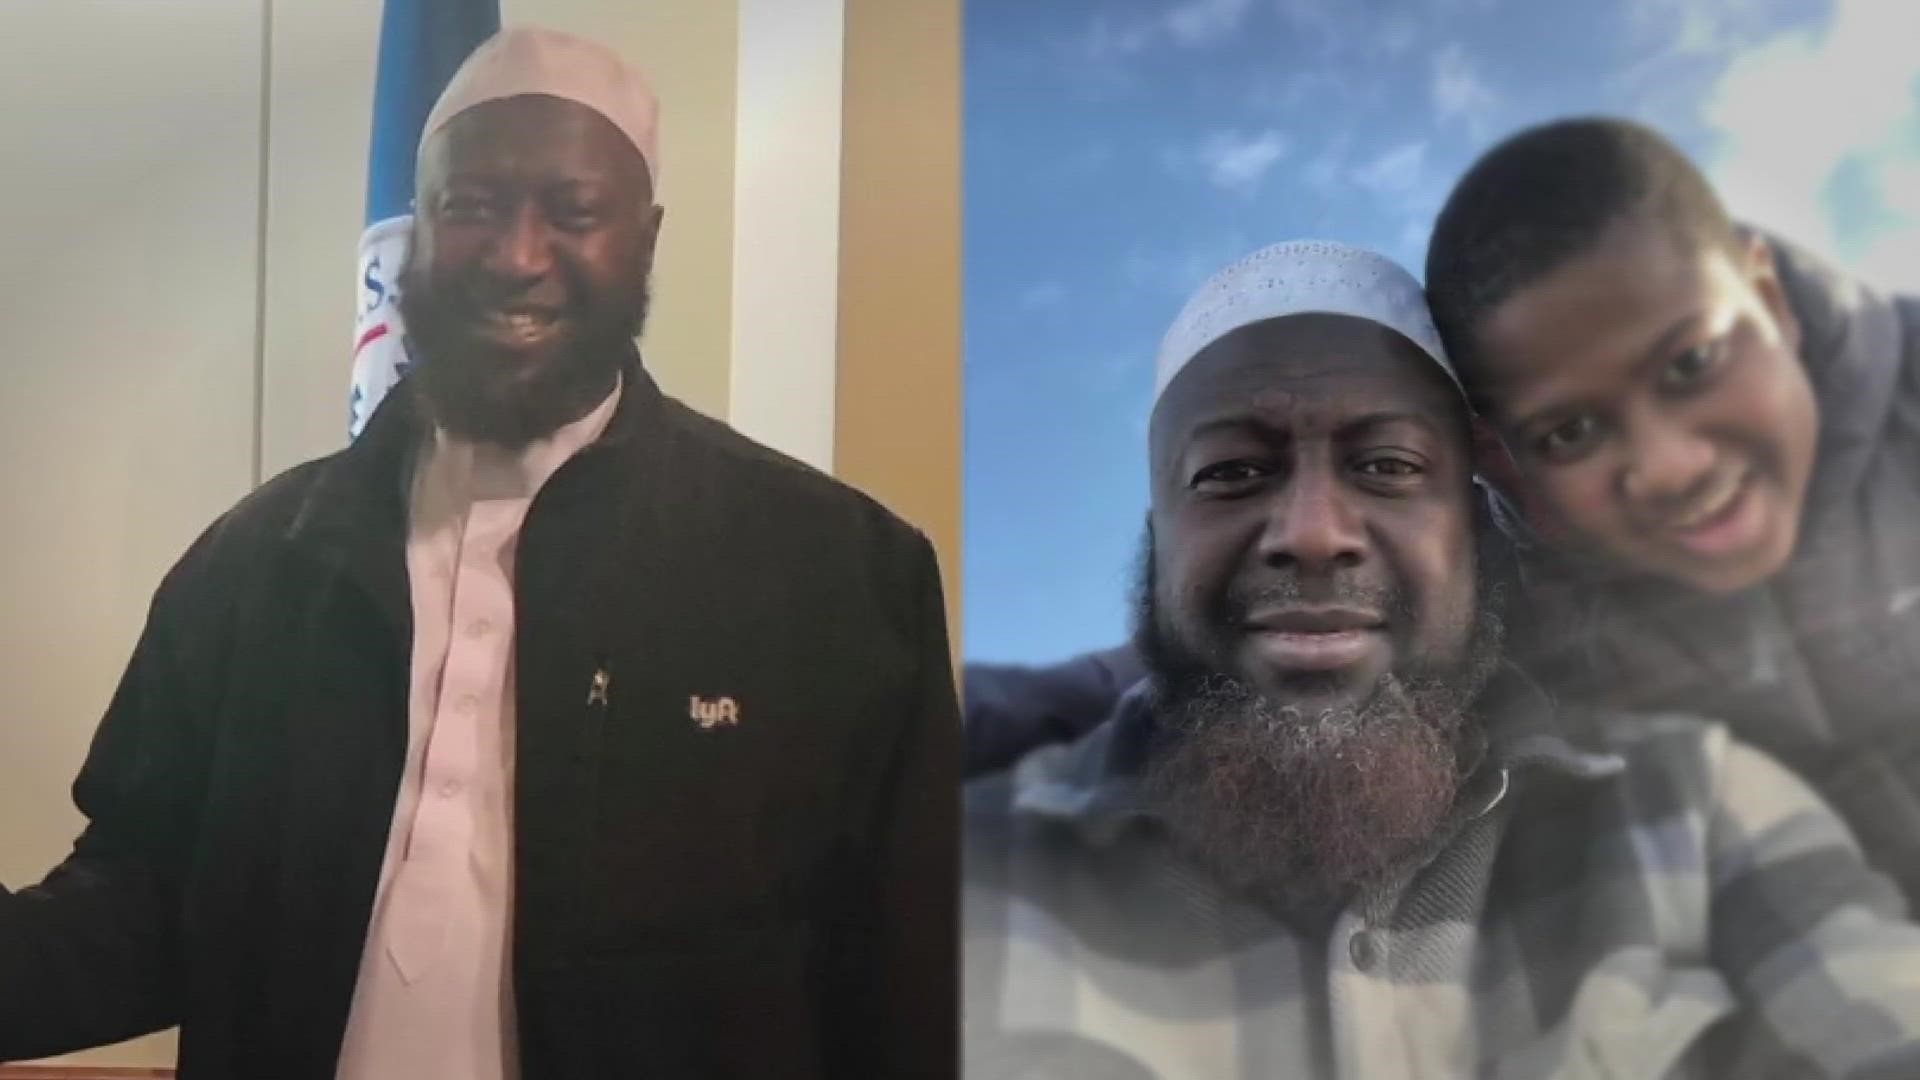 Mahamadou Kabba, a father of five, was shot seemingly at random while sitting in his car in Renton on Jan. 12. He died in the hospital two weeks later.